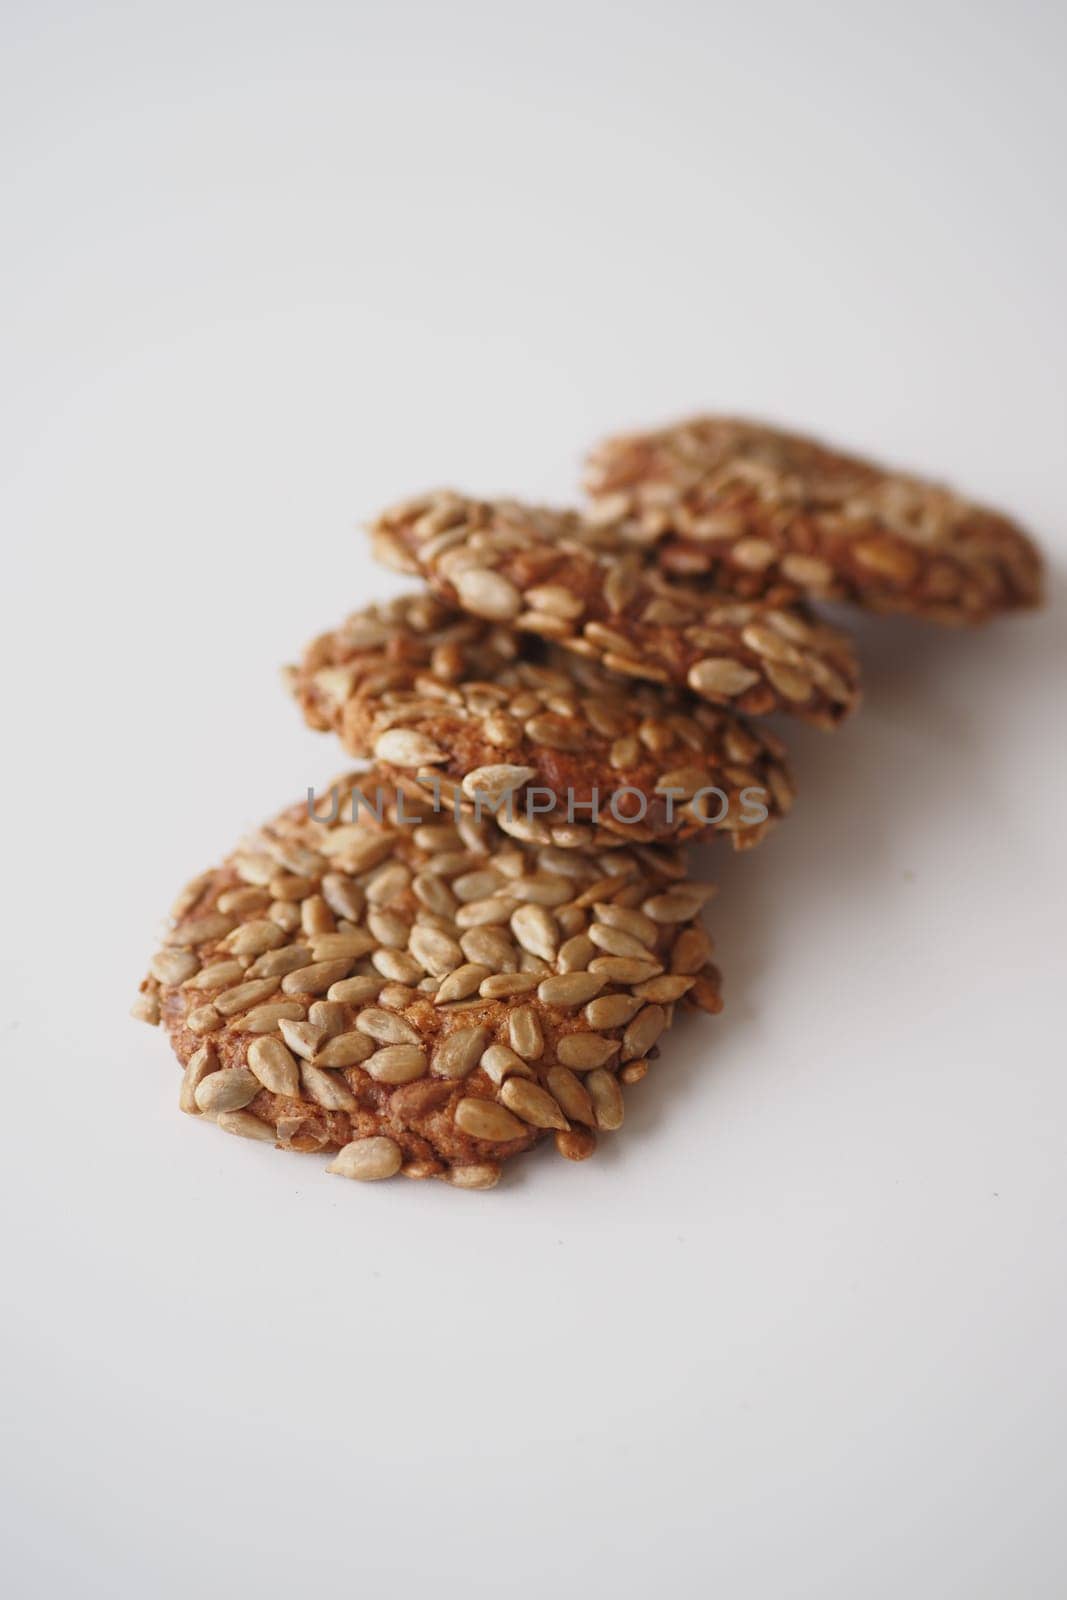 sesame sweet cookies on white background by towfiq007